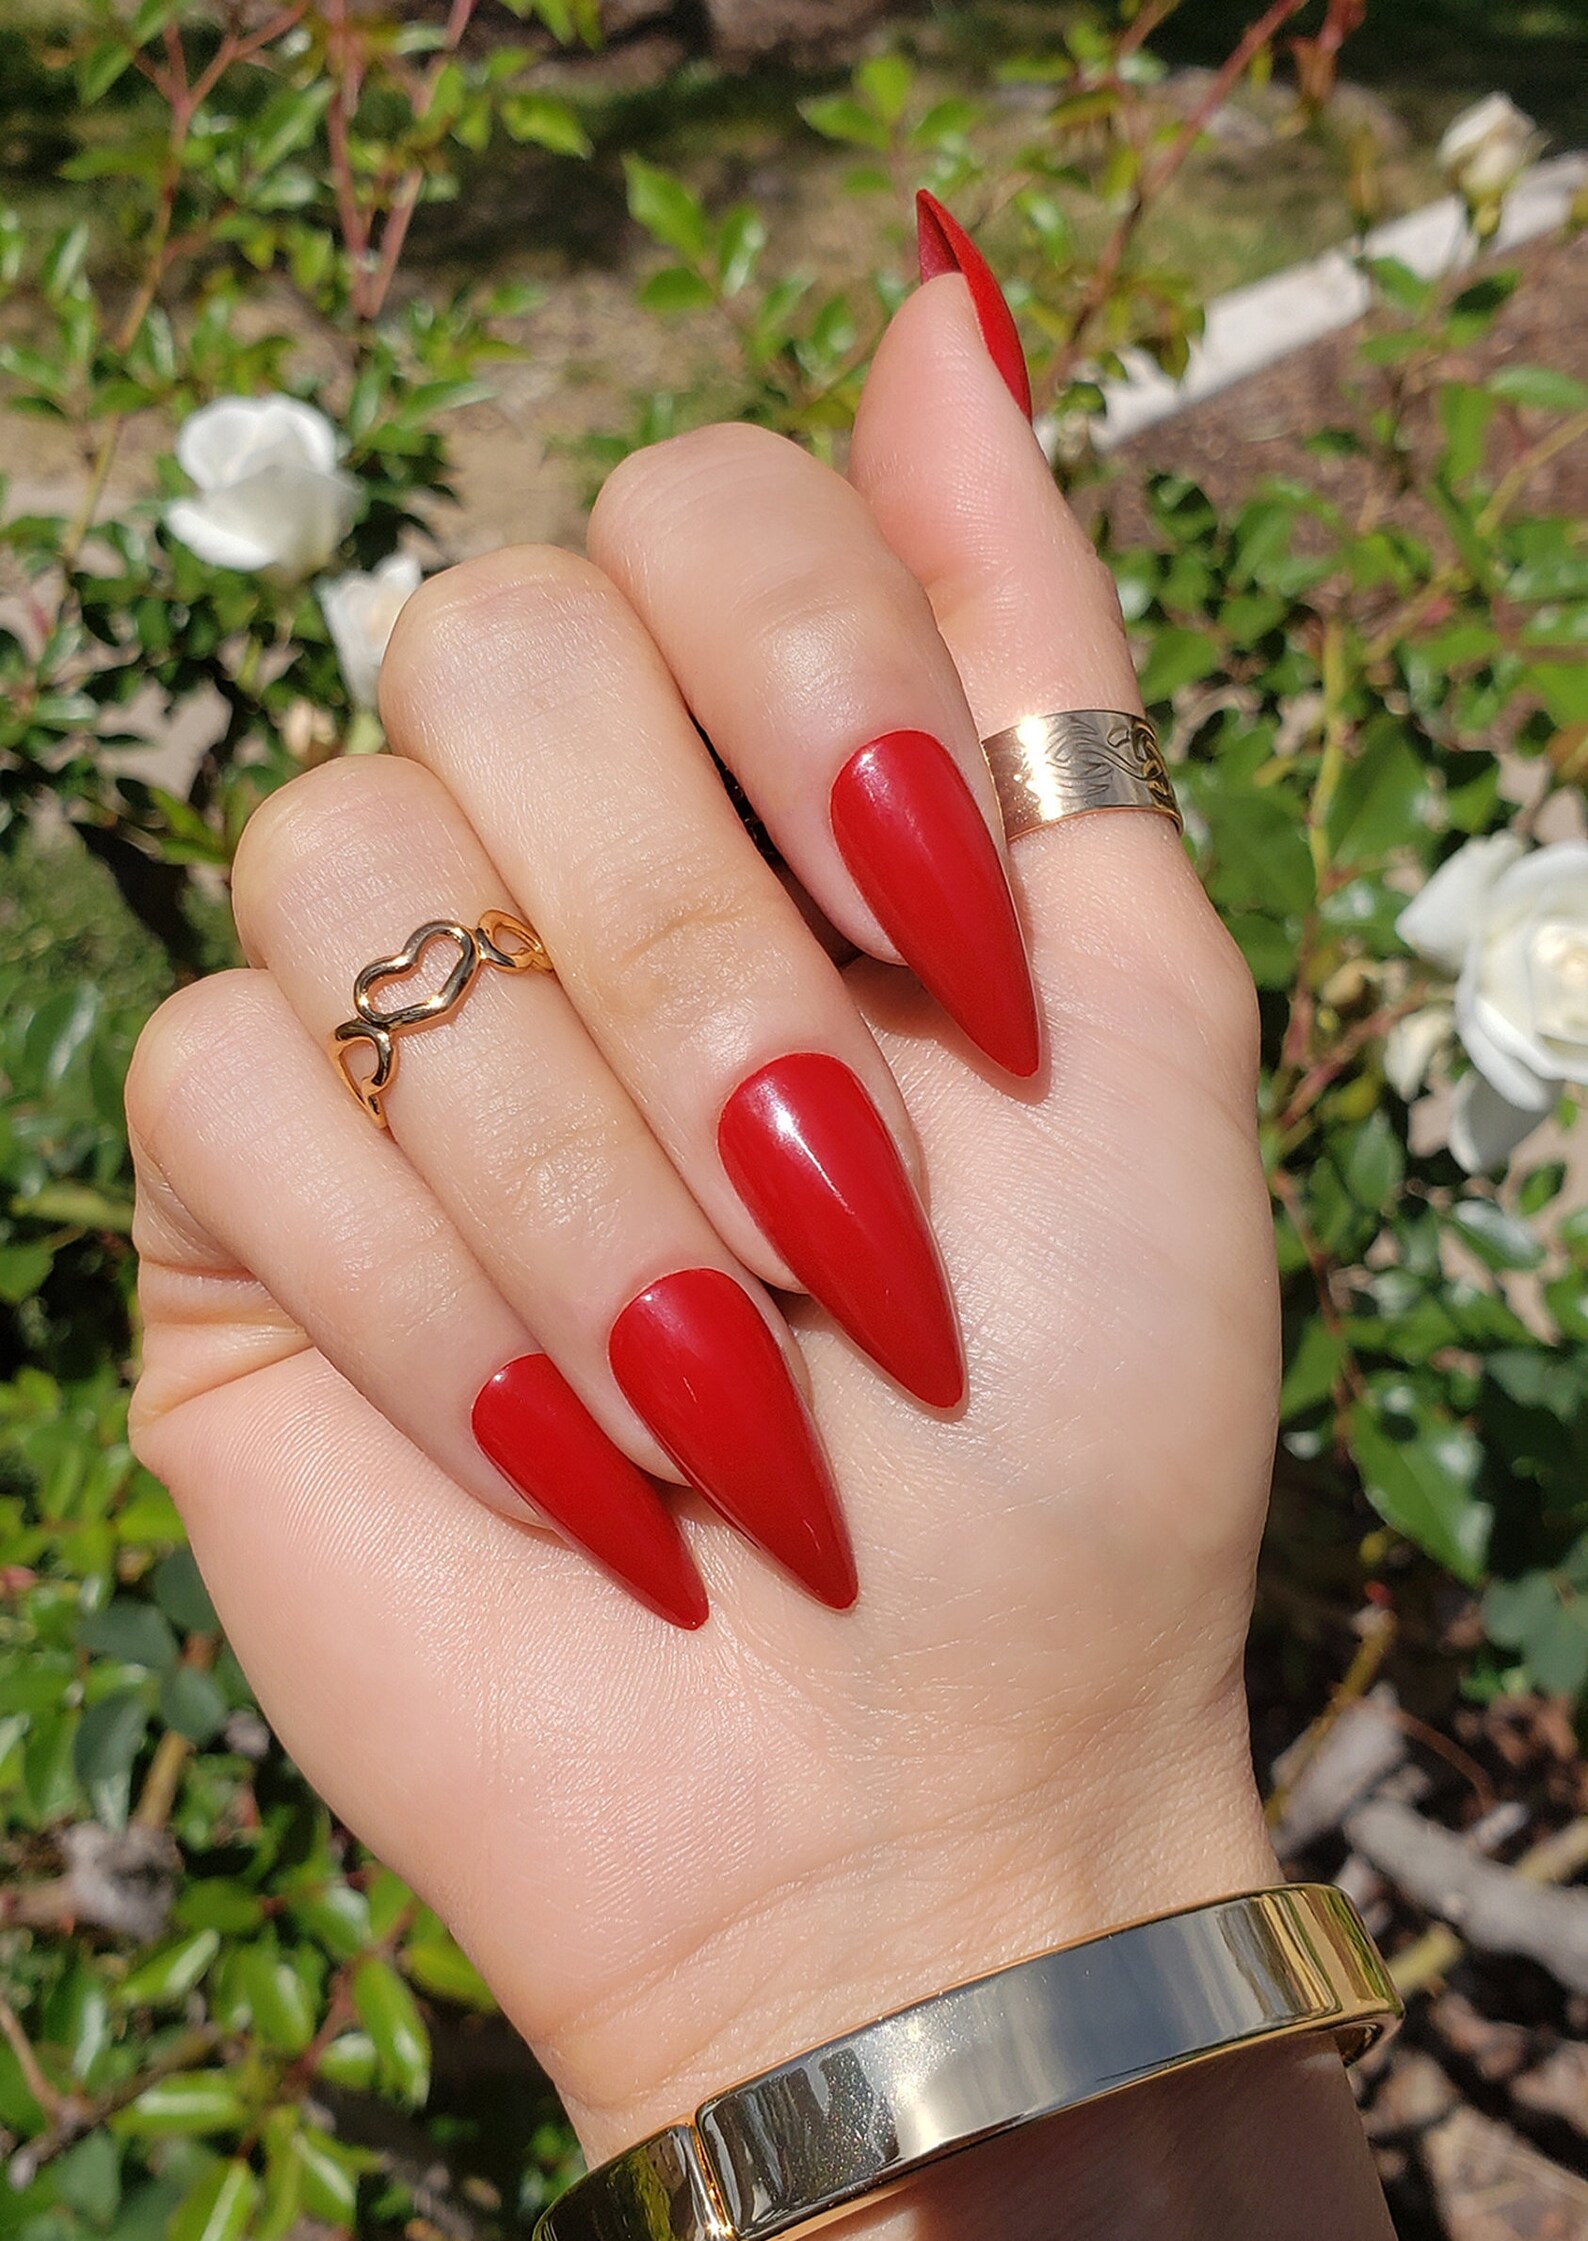 Long Red Stiletto Press On Nails with Kit Included | Etsy